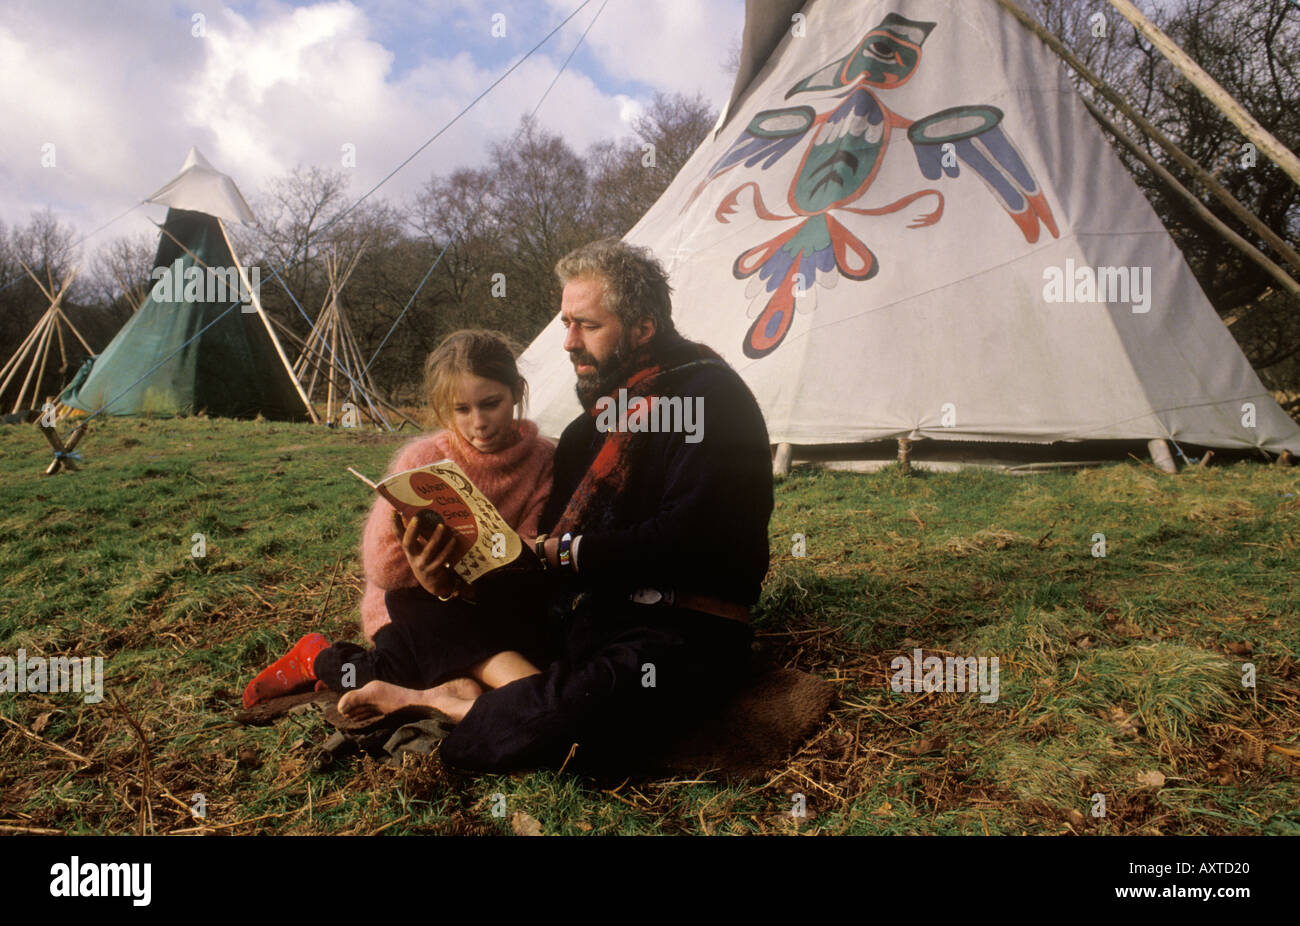 Tipi valley 1980s UK. Ged Edwards son Seren Edwards father reading a book. Dropping out of ordinary societ. 1985 Llandeilo, Wales 1985 HOMER SYKES Stock Photo